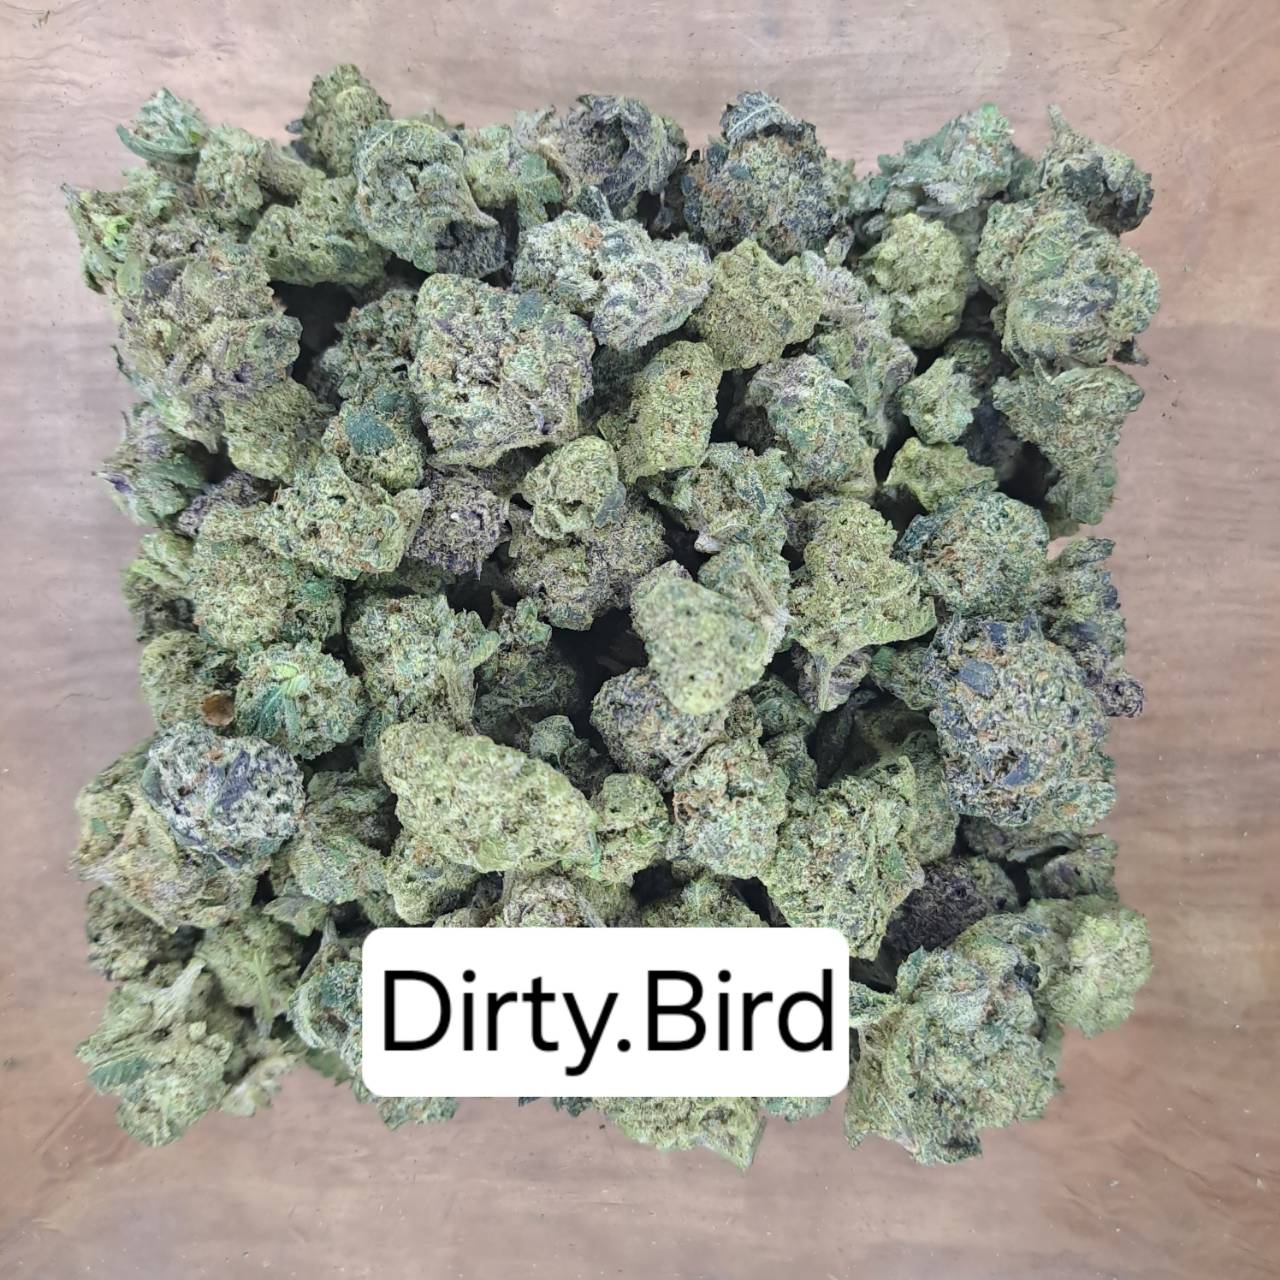 Product Image for Dirty Bird